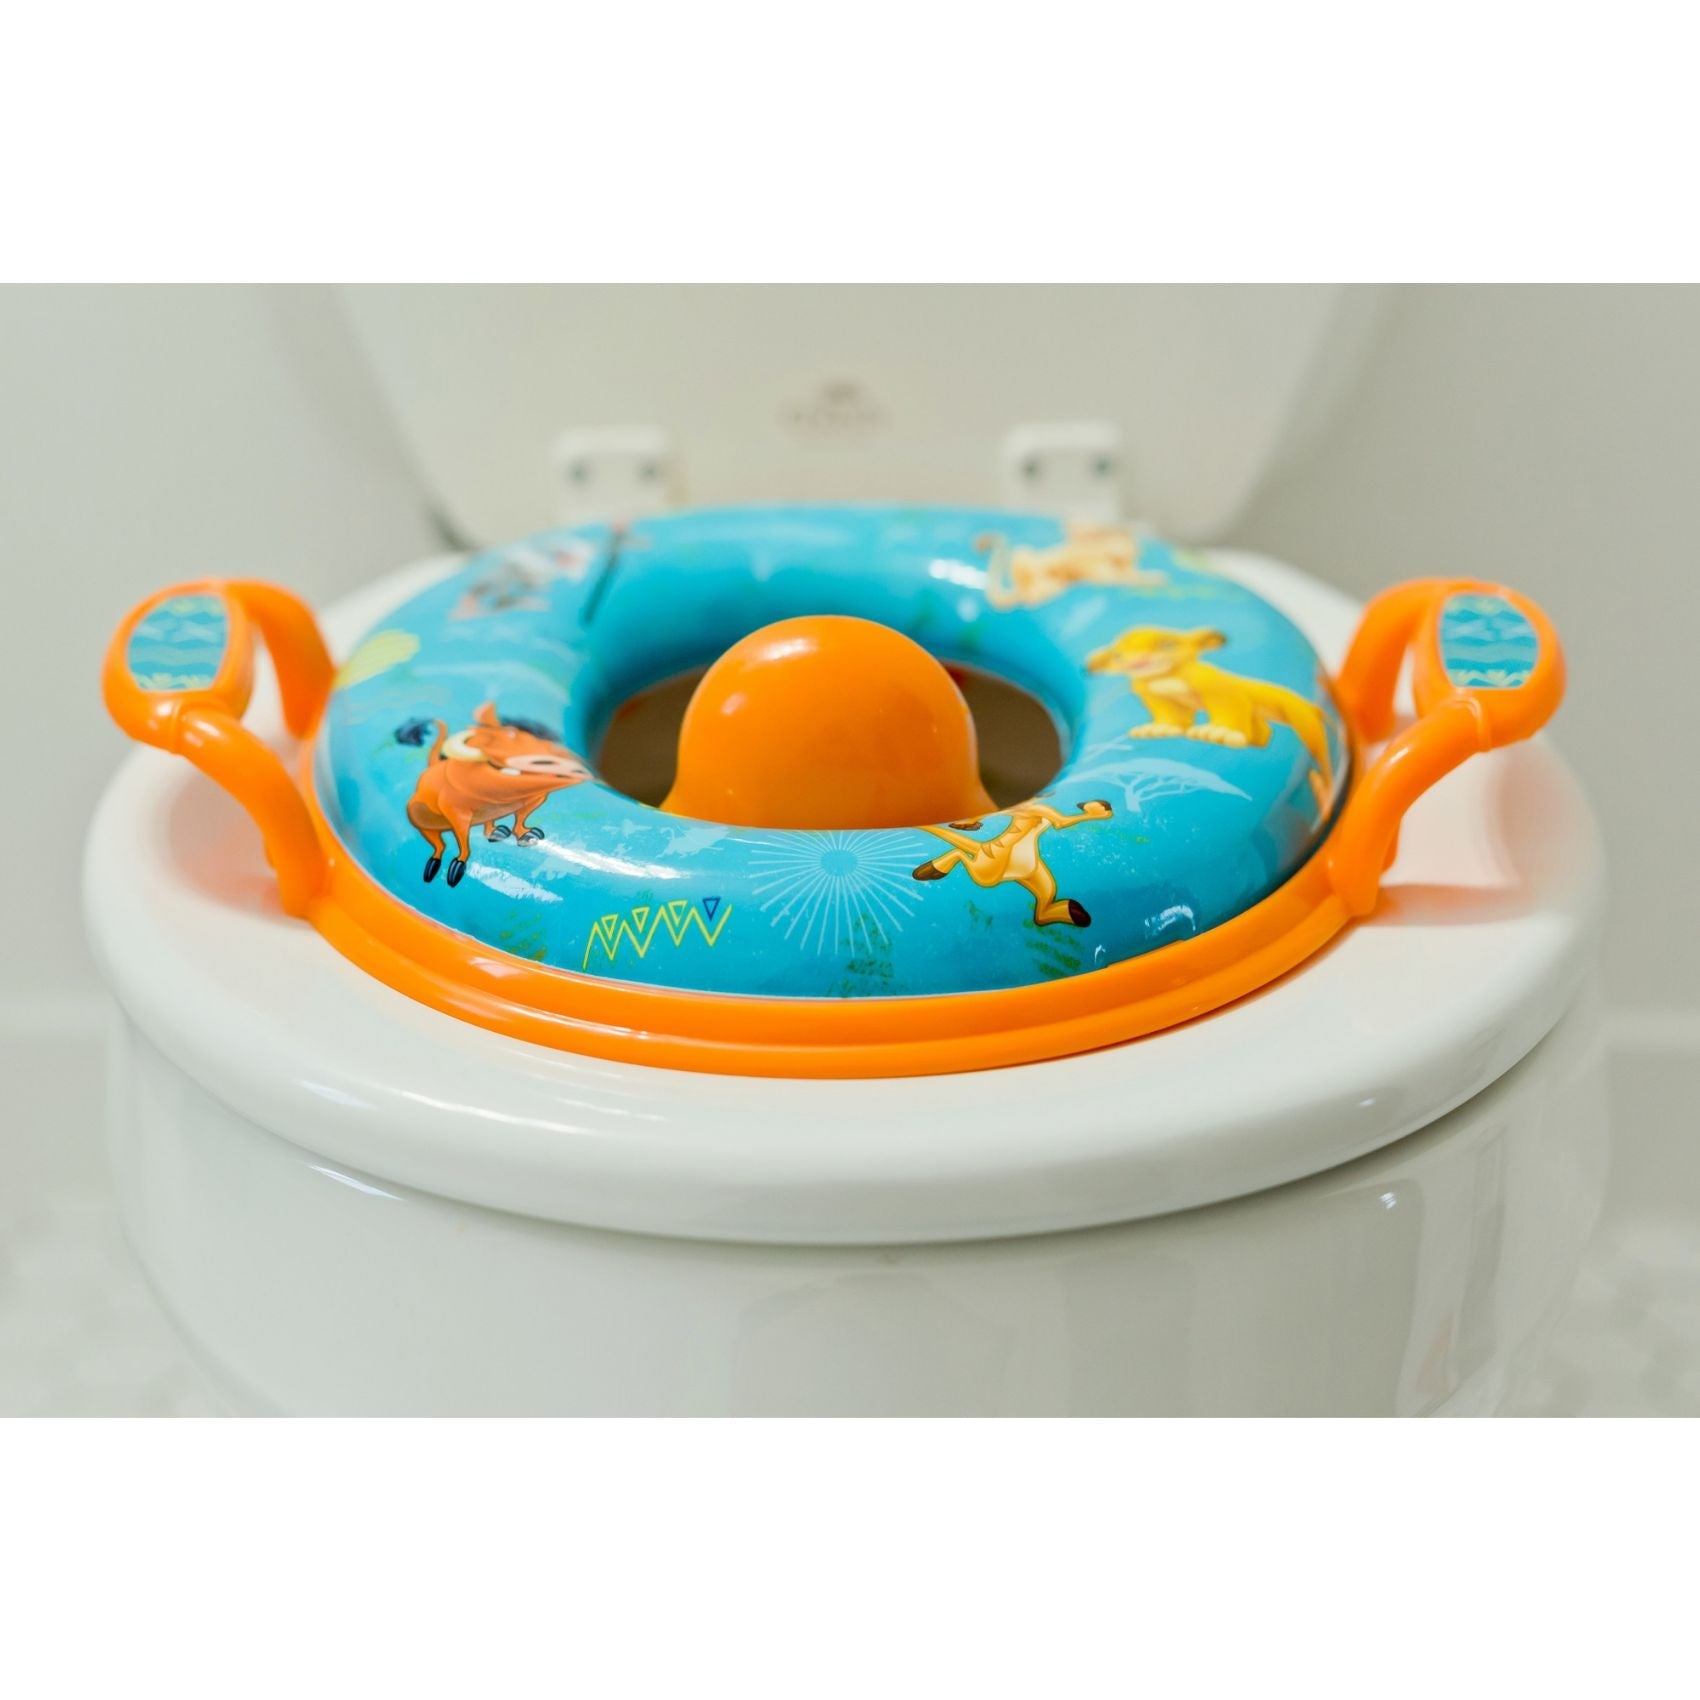 The First Years -Lion King Potty Ring